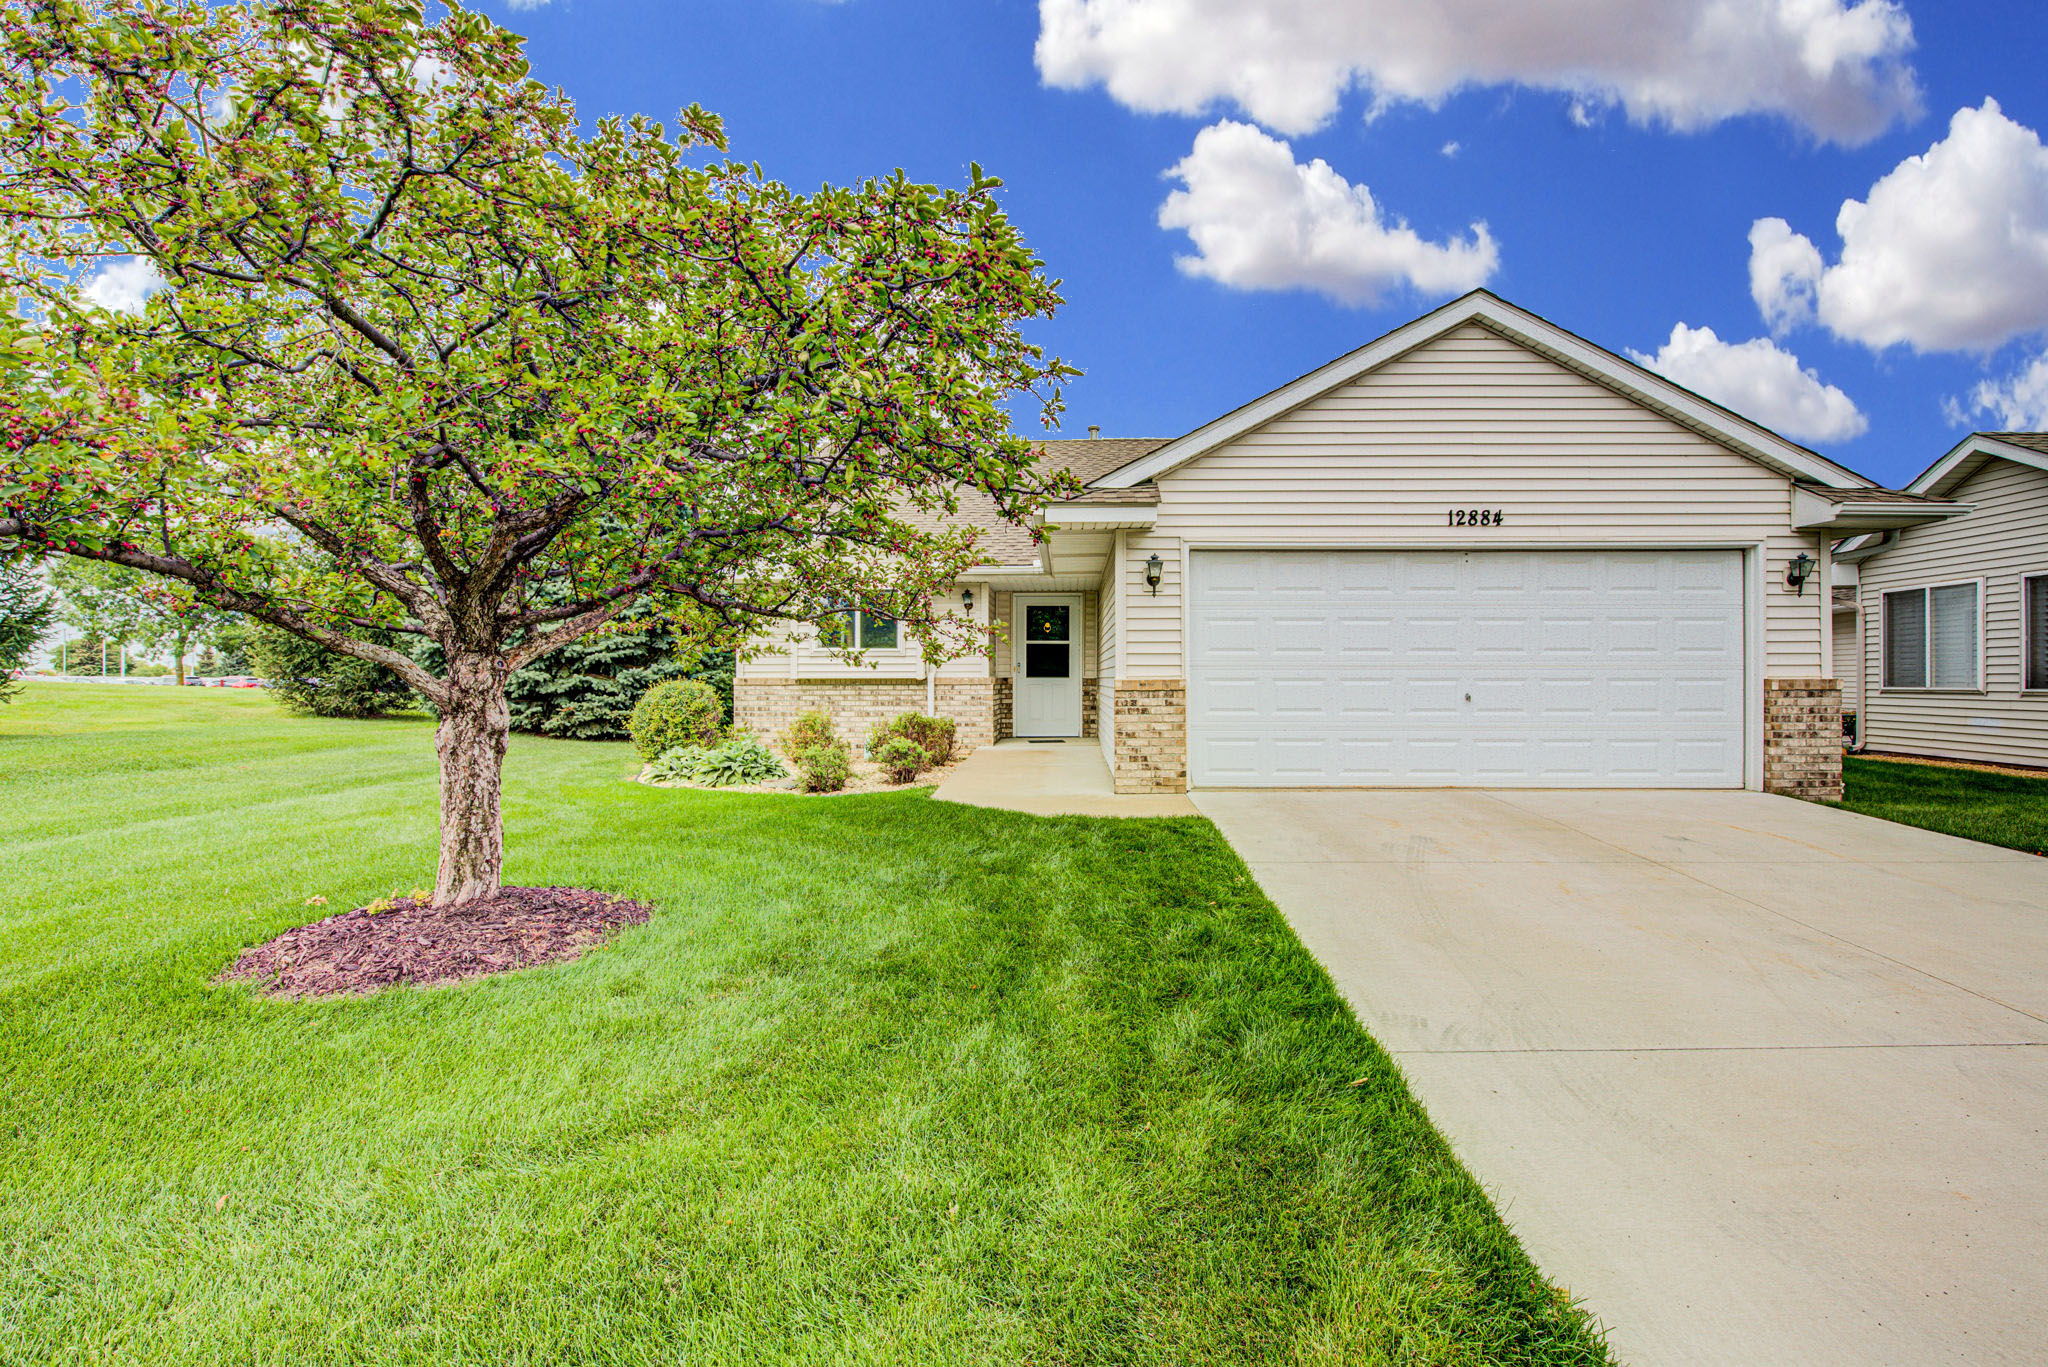  12884 Kerry St NW, Coon Rapids, MN 55448, US